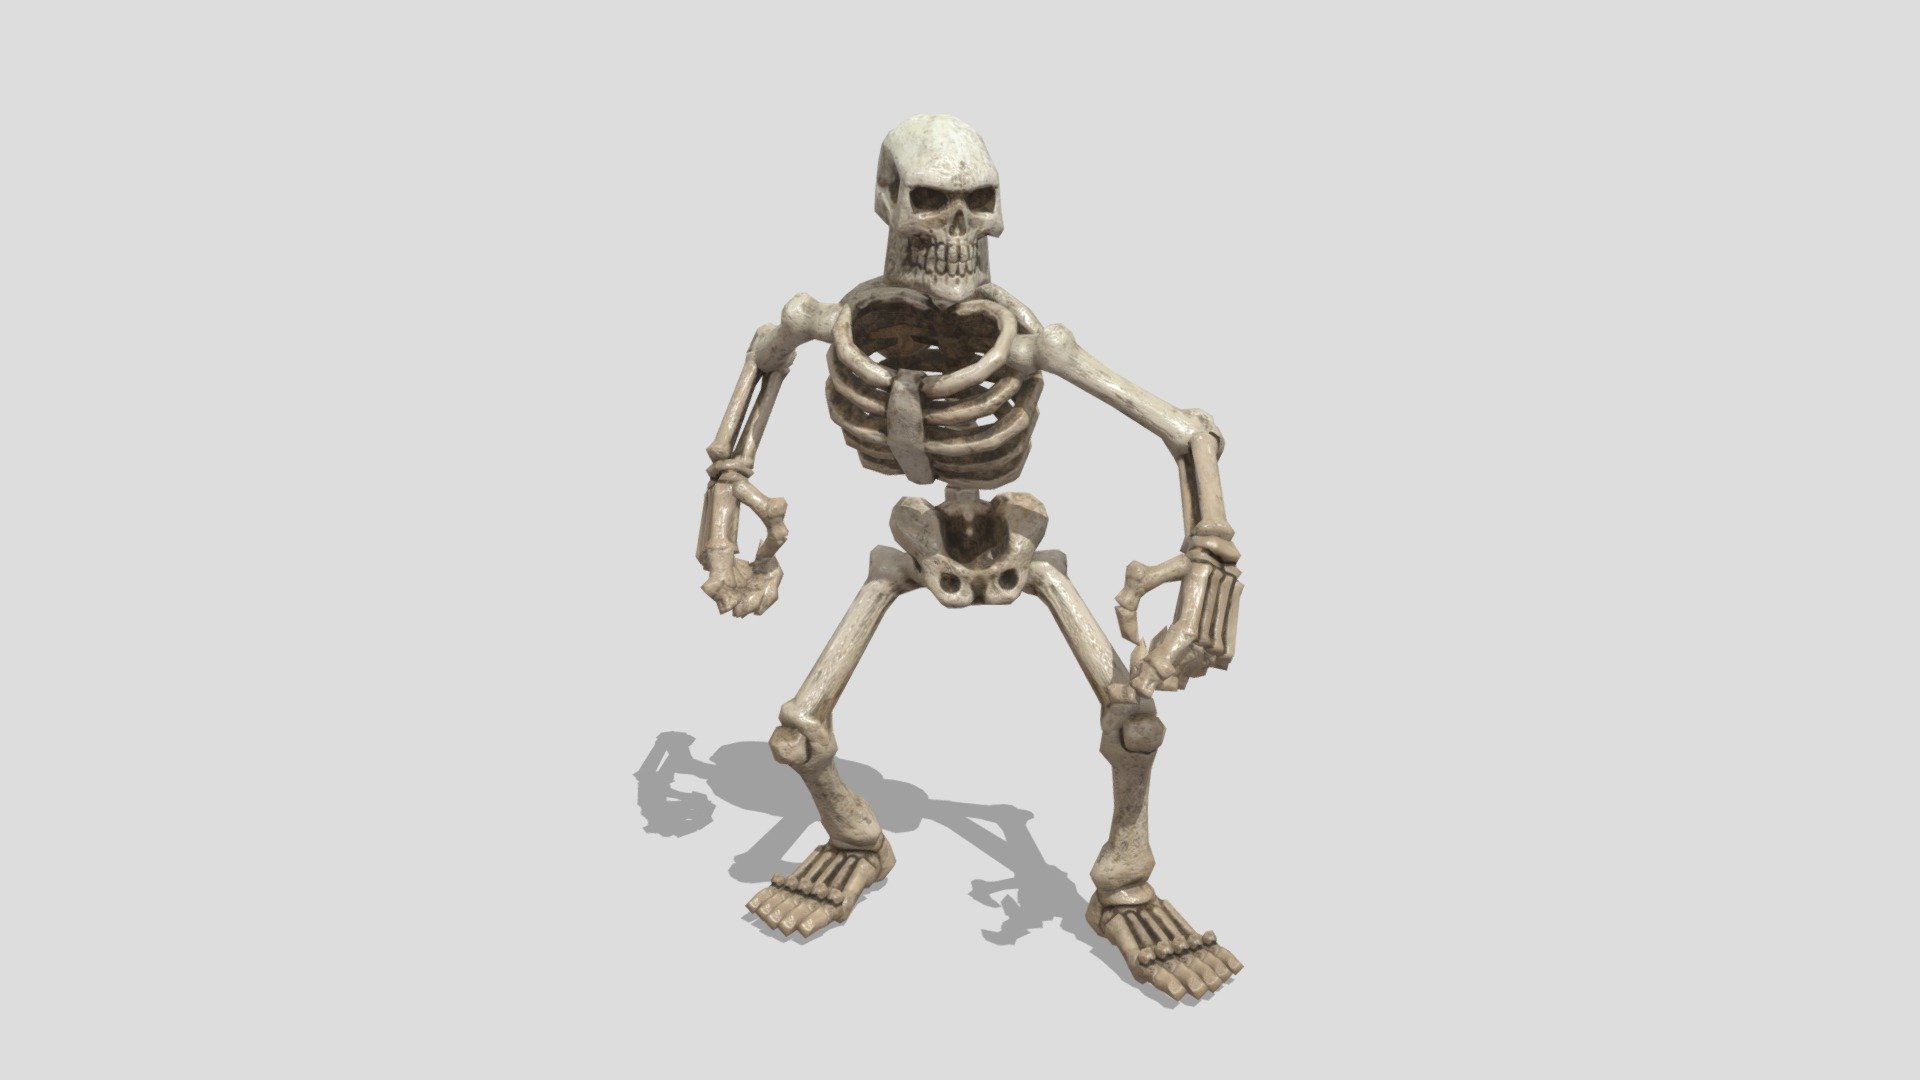 Made this for the reworking of a game.
This Skeleton has odd scaling because it was made for 3D printing.
It's been tweaked a bit since for in game usage and to match a more realistic scaling.

Come around and check out my other works on YouTube: https://www.youtube.com/c/VidovicArts101 - Skeleton - 3D model by VidovicArts (@oshjavid) 3d model